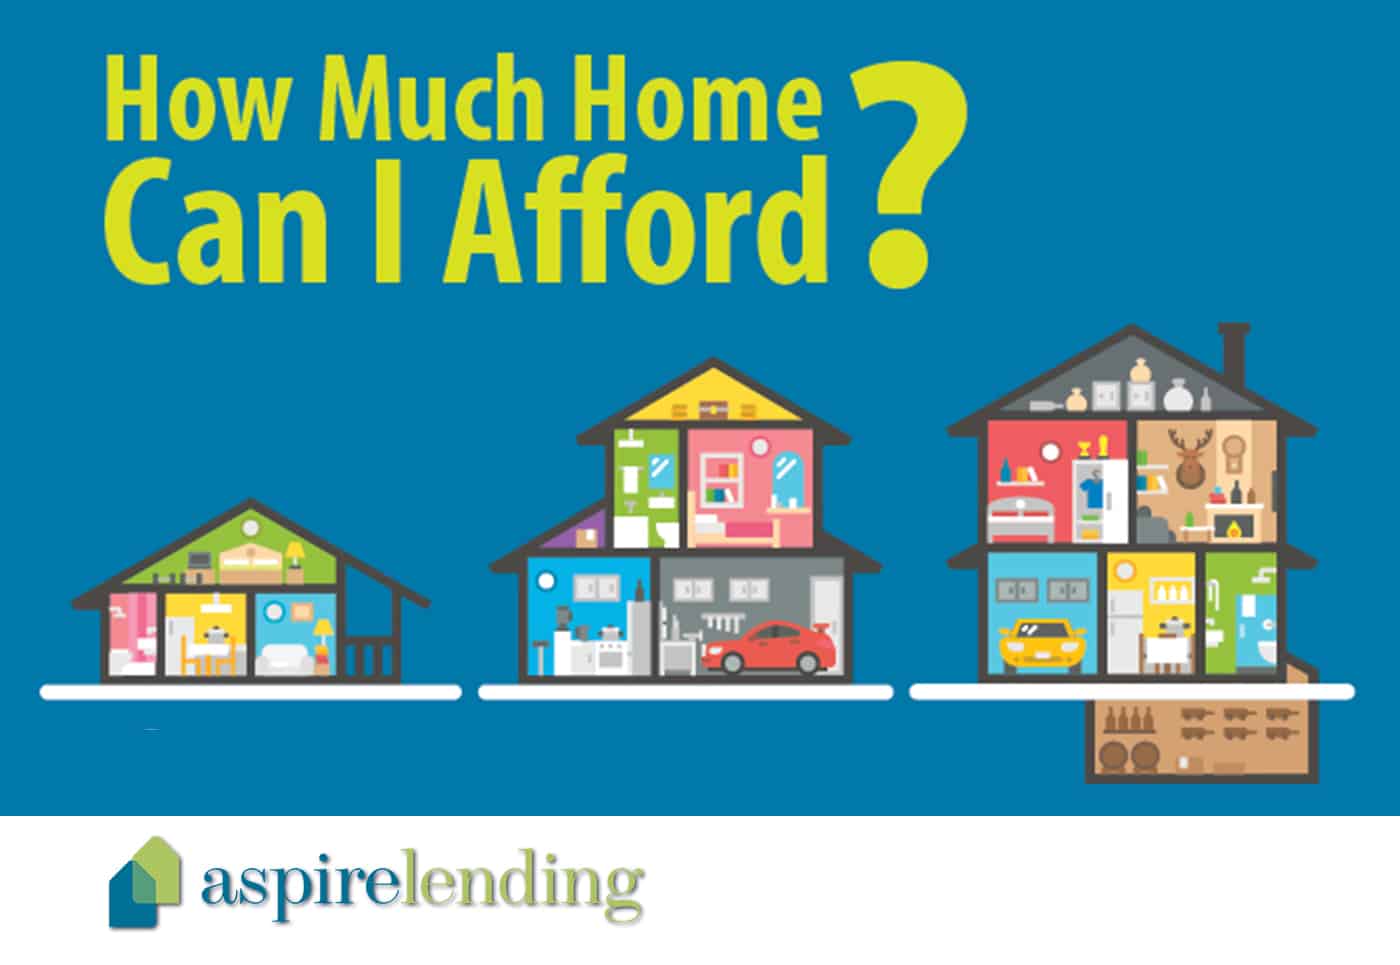 How much home can I afford?